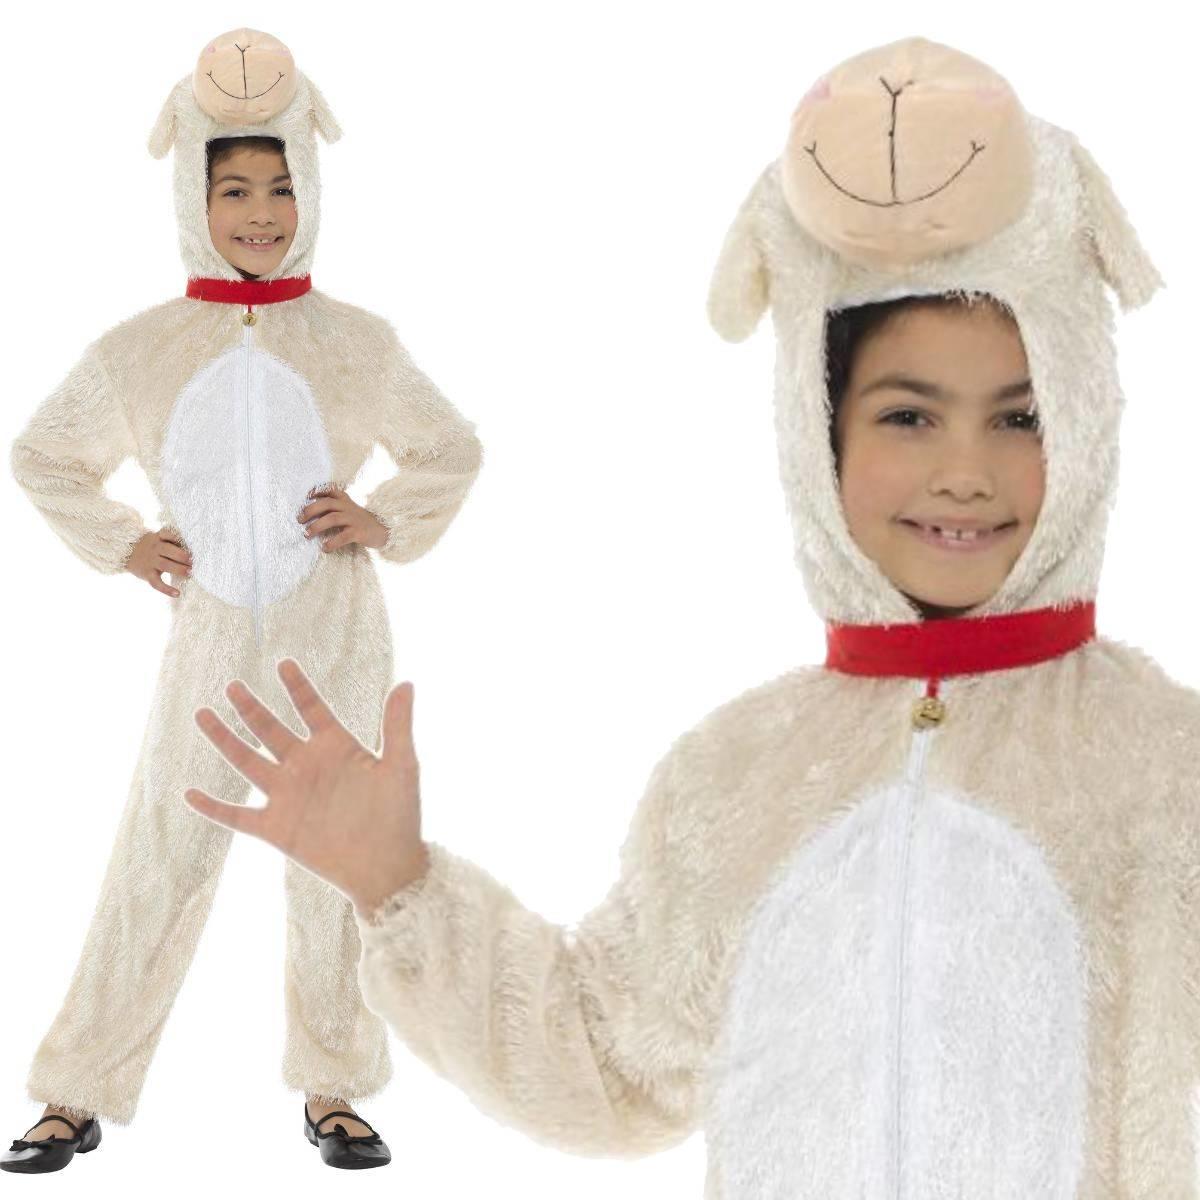 Kiddies Lamb fancy dress costume by Smiffys 30010 available here at Karnival Costumes online party shop